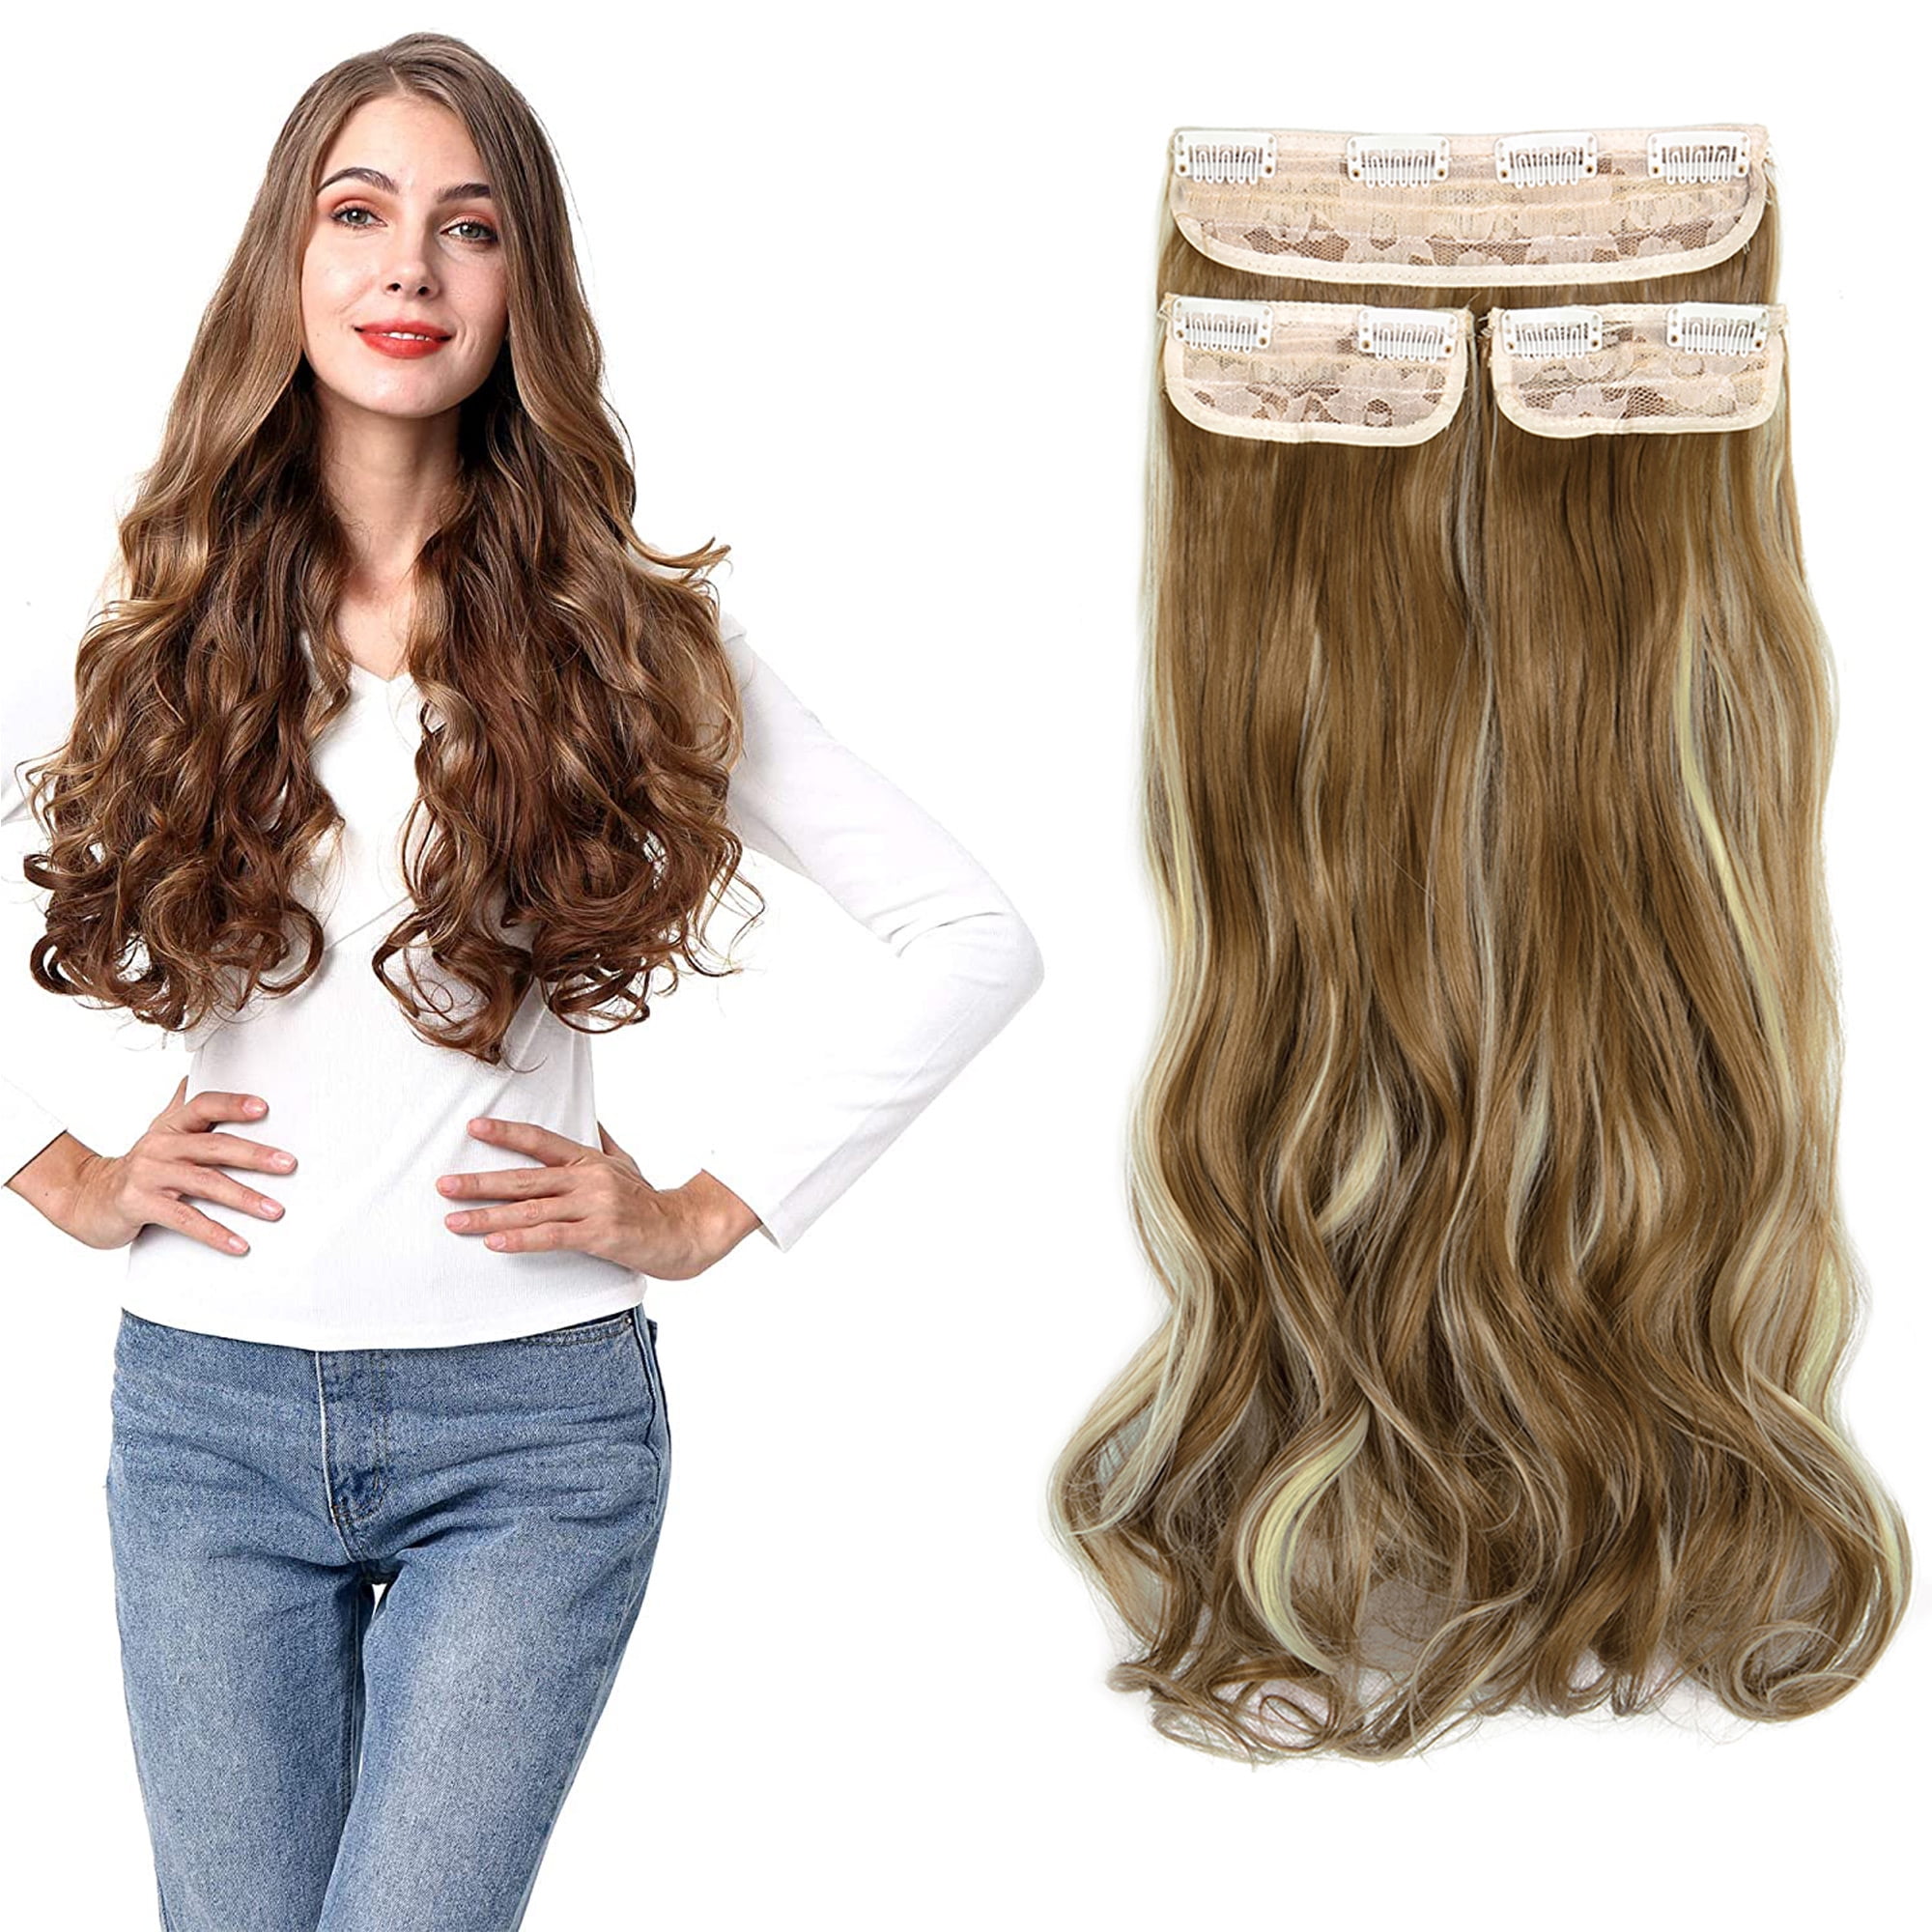 24 Straight Curly Wavy 3 Pieces Hair Extensions Natural Straight Clip ...